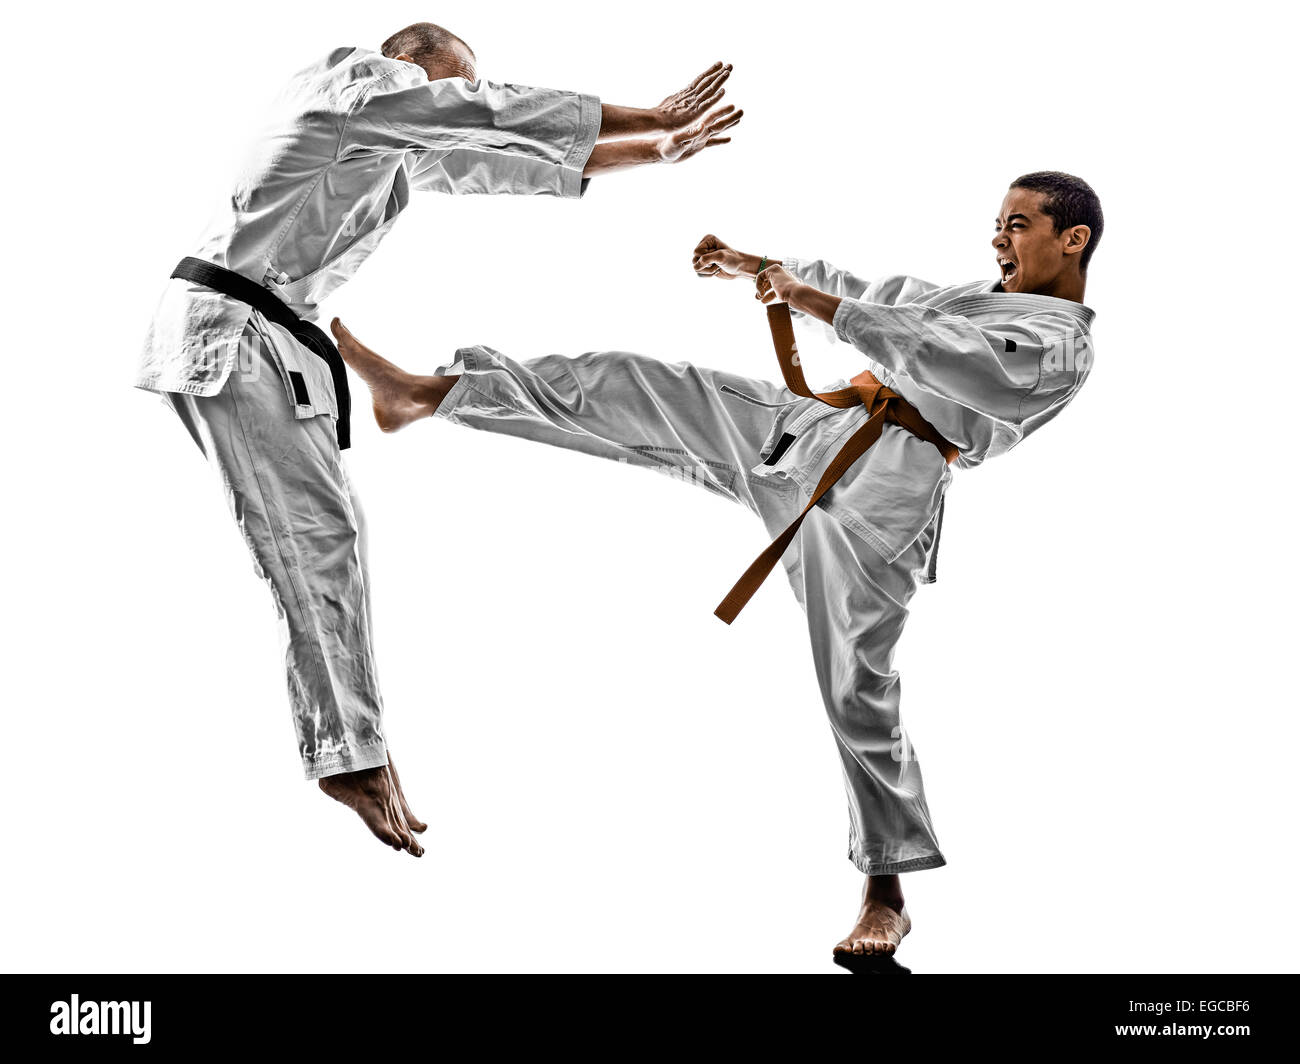 two karate men sensei and teenager student fighters fighting isolated on white background Stock Photo